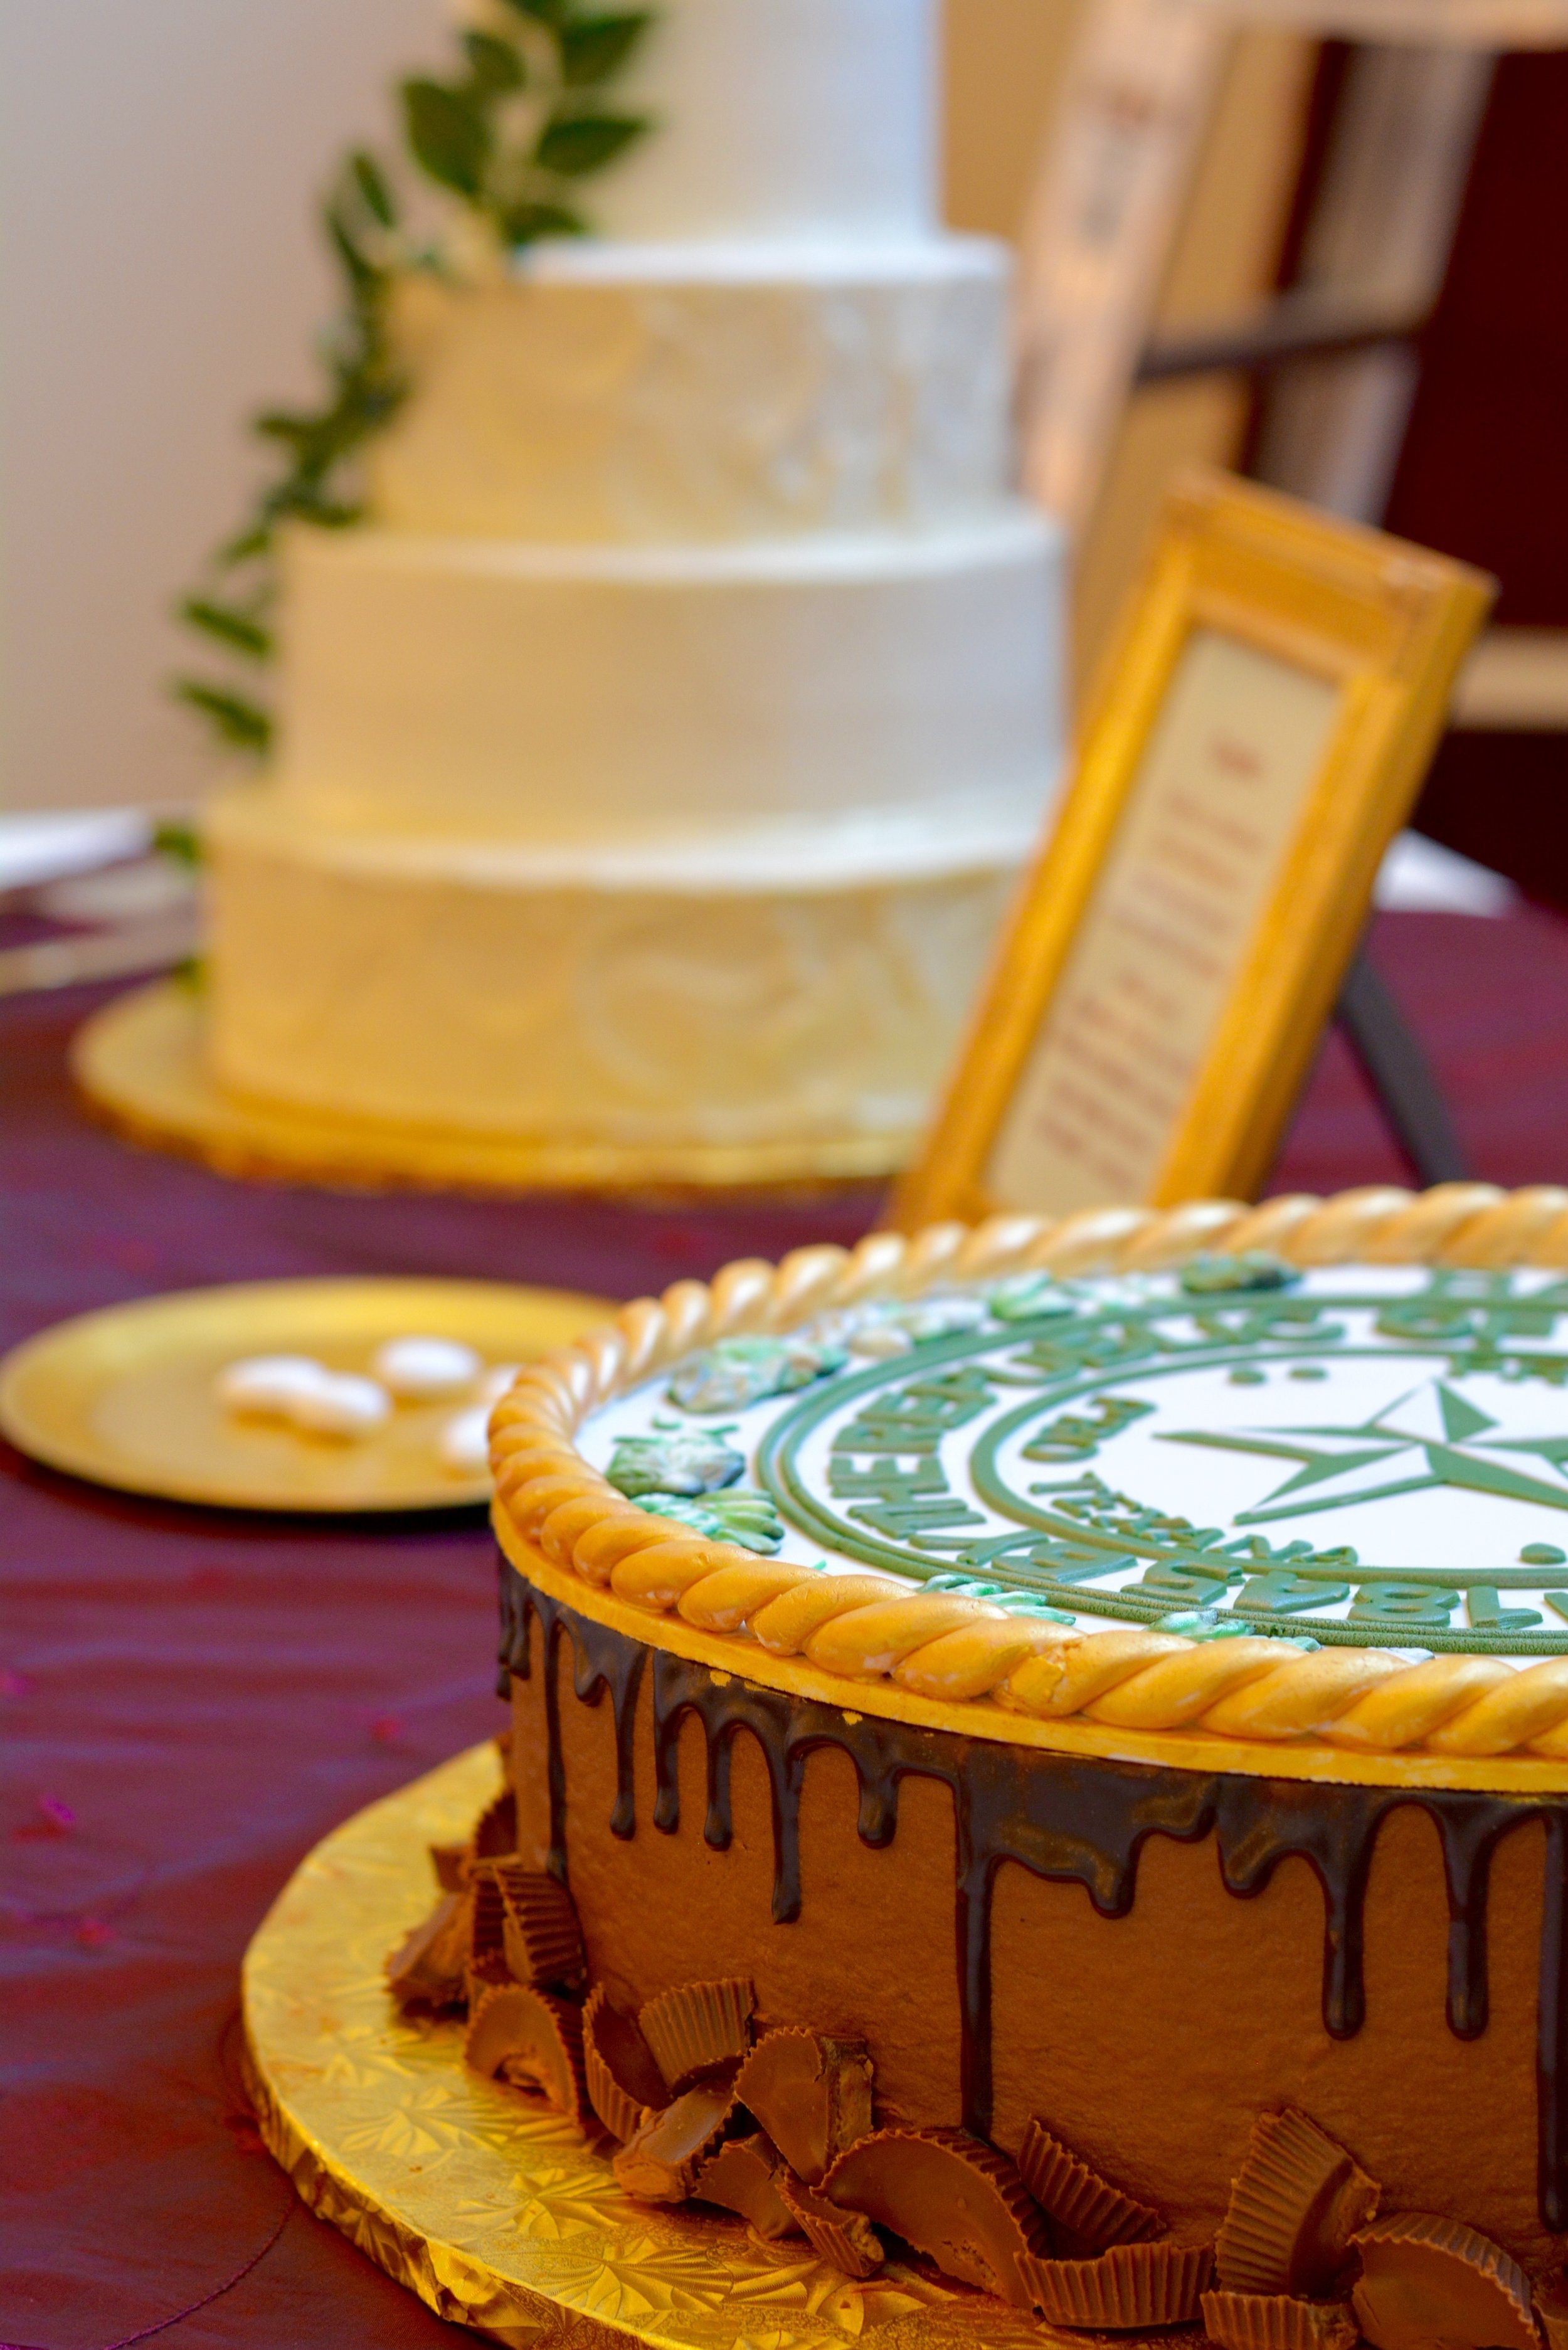 dallas wedding cake bakeries, annie's culinary creations, wedding cakes, baylor grooms cake, baylor seal cake, chocolate peanut butter cake, champange cake, gold and white cake with greenery, bakery in dallas, heidi lockhart somes photography, greek…